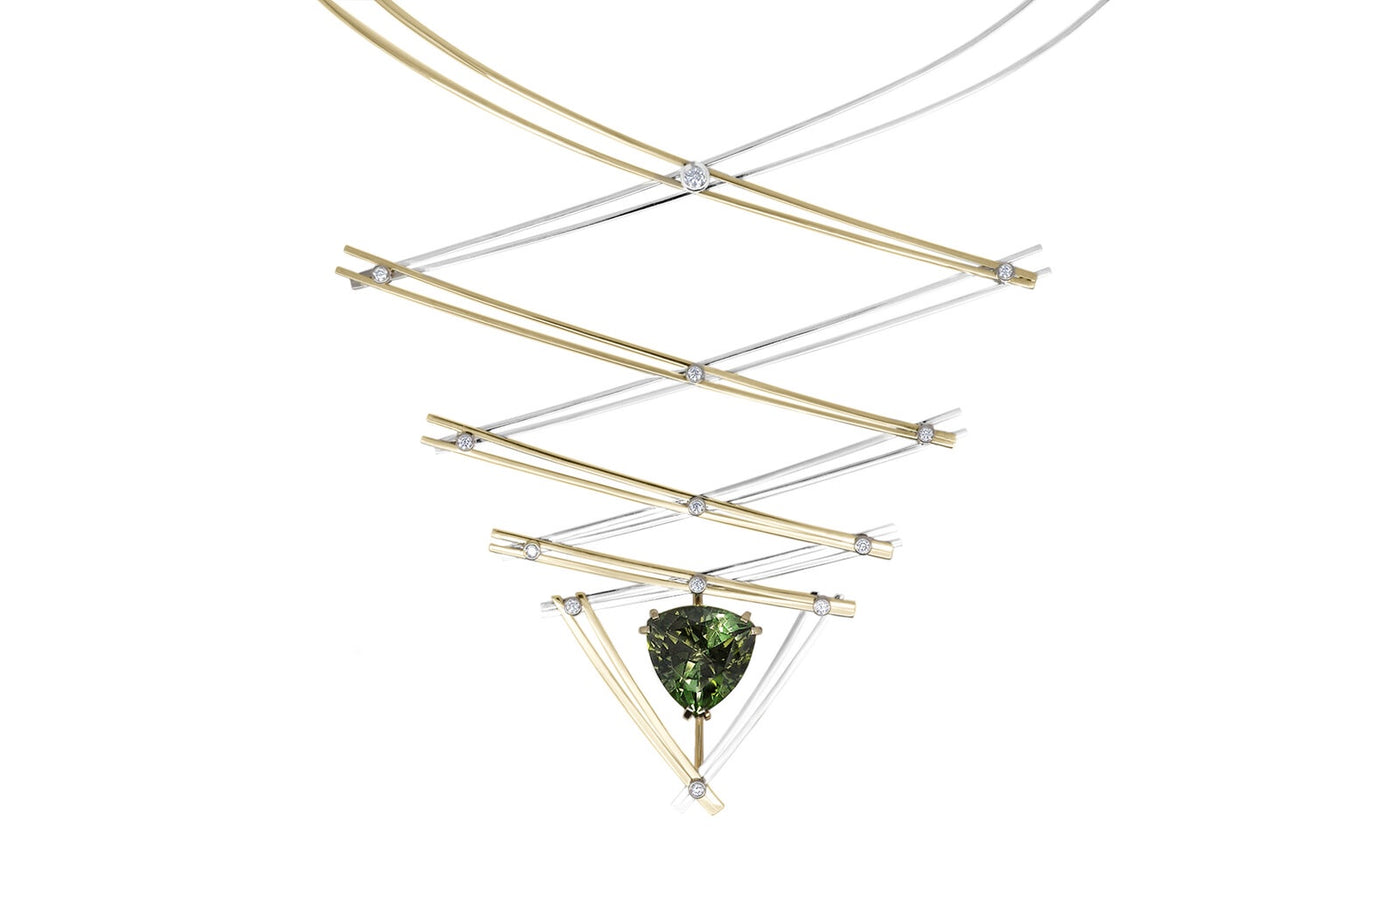 X-Tension: Green Tourmaline Concertina Necklace in Gold | 11.85ct